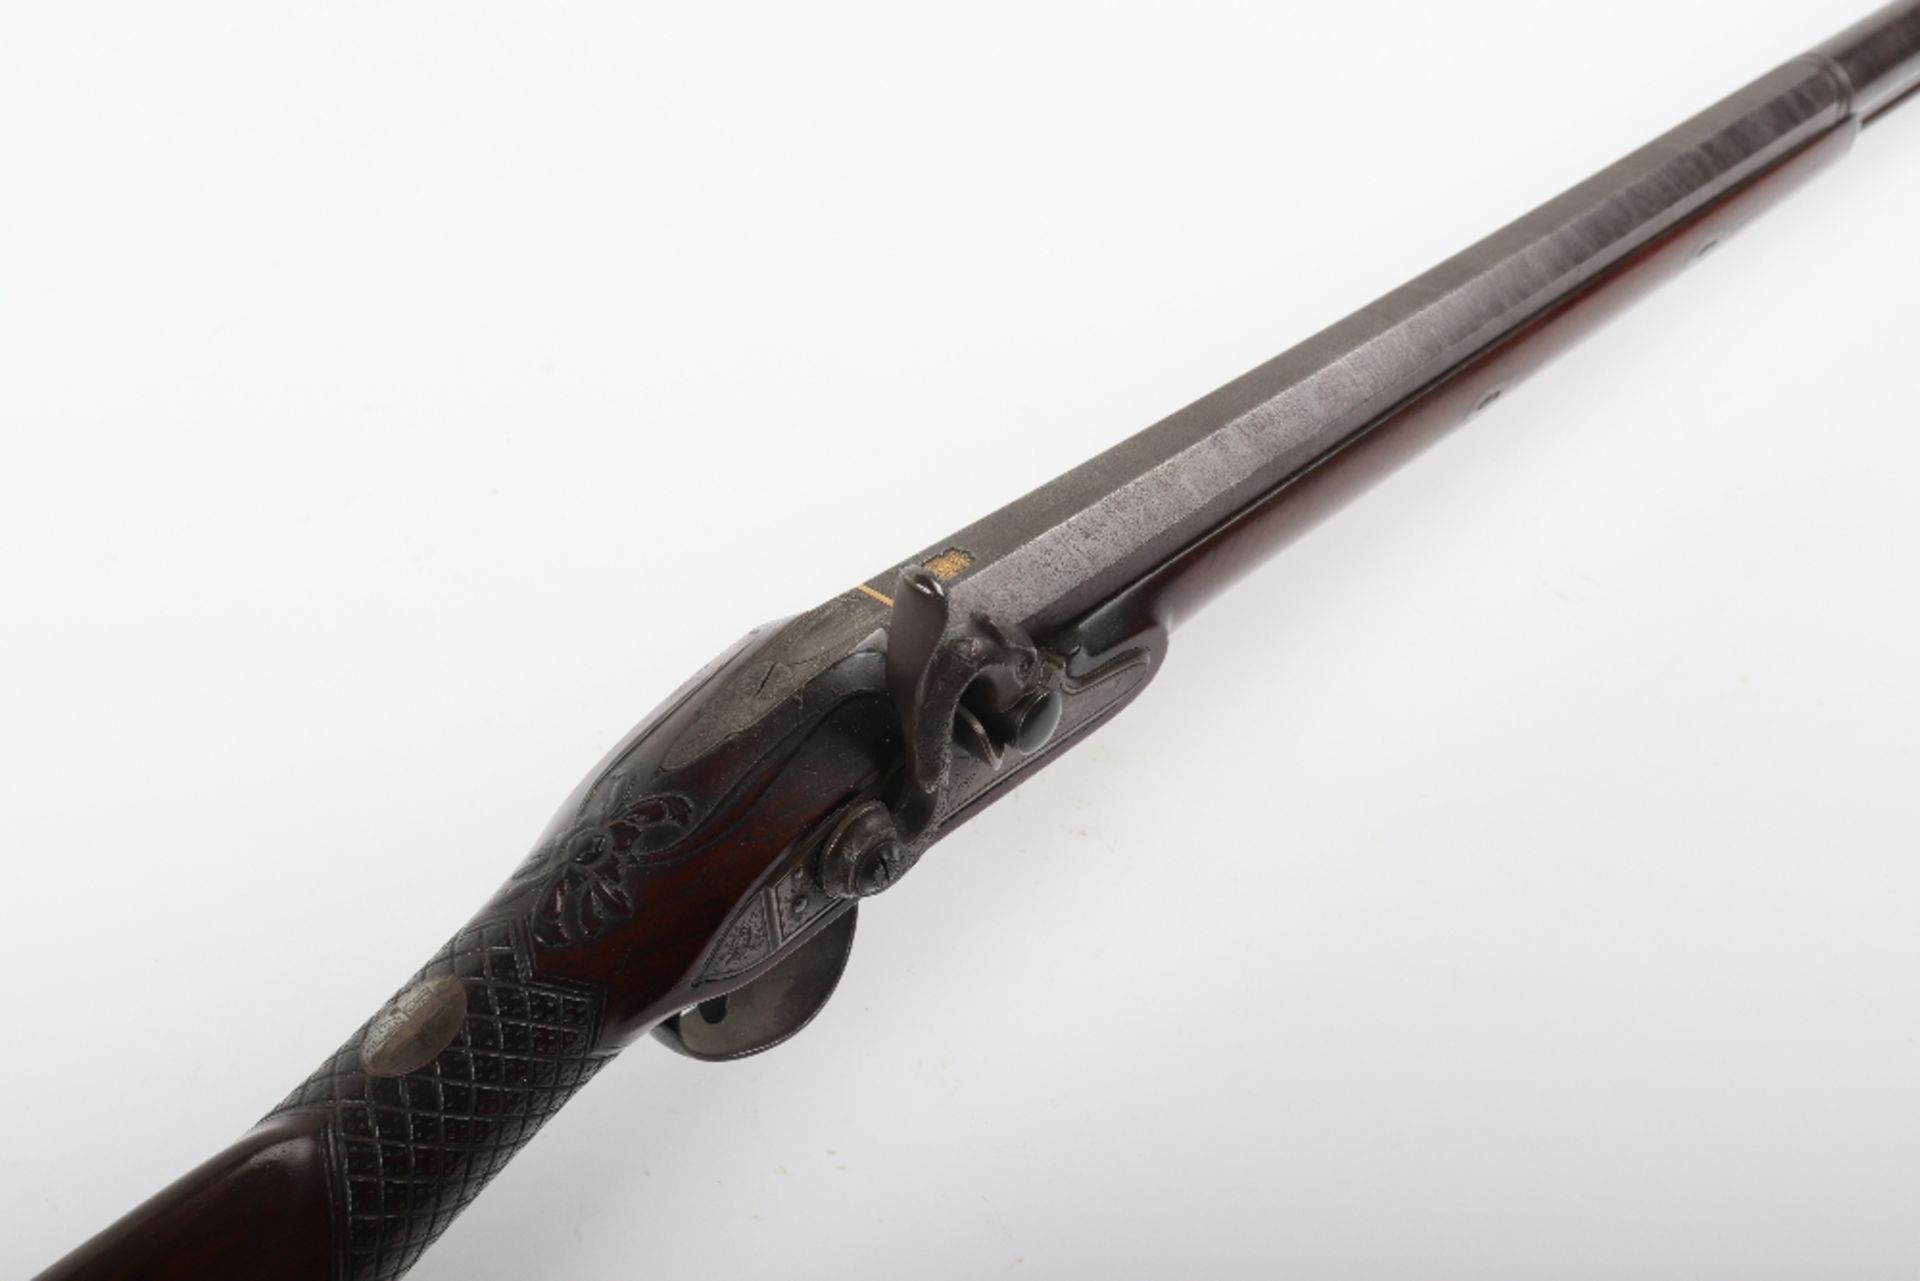 16-Bore Percussion Sporting Gun by D. Egg, Late 18th Century - Image 6 of 15